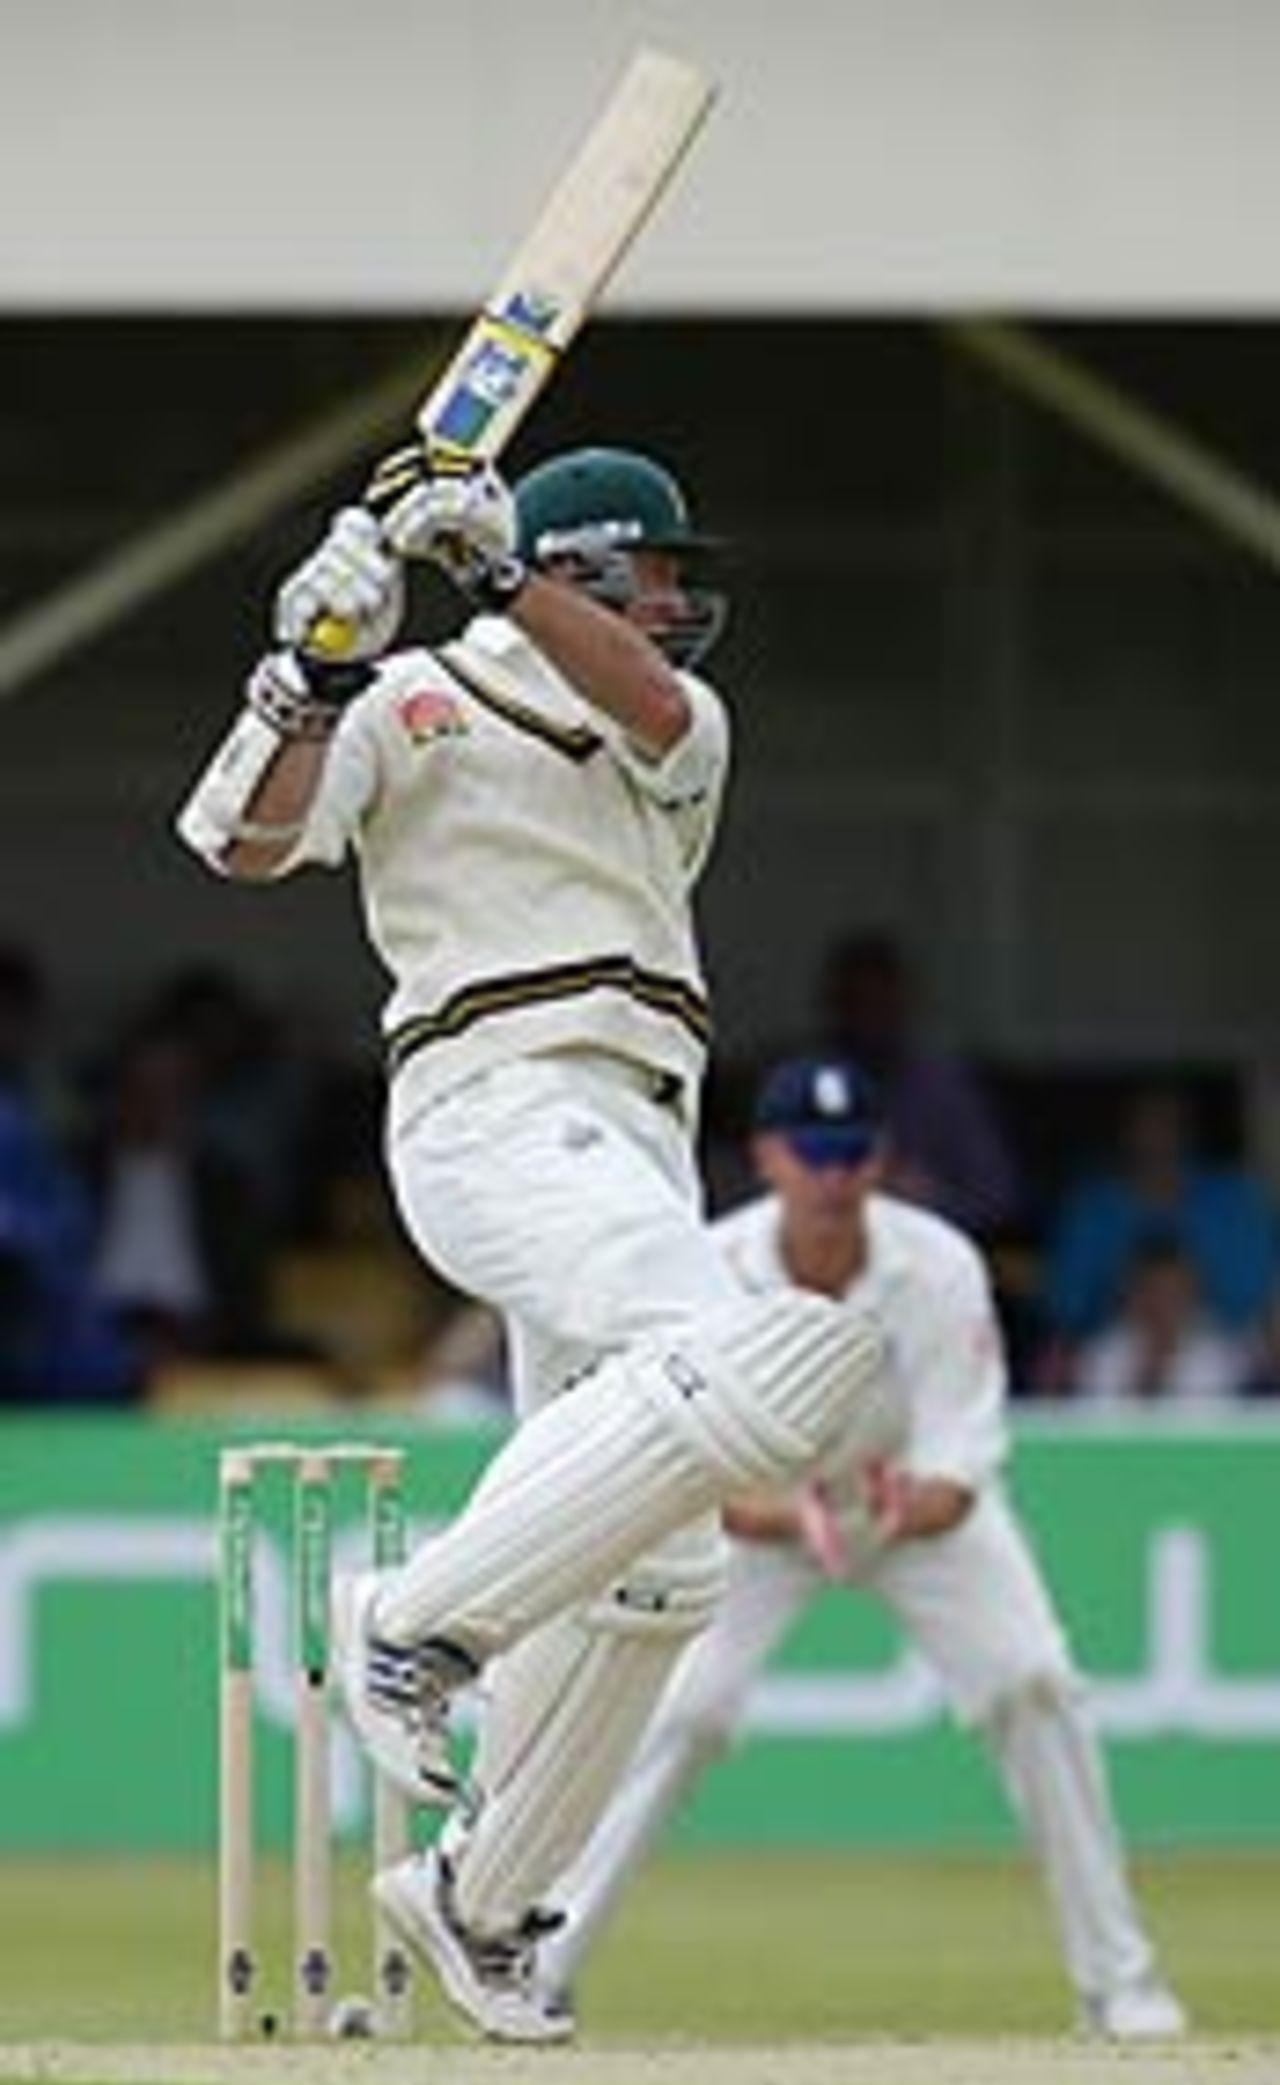 Graeme Smith hits out, England v South Africa, 1st Test, Day 3, July 26, 2003